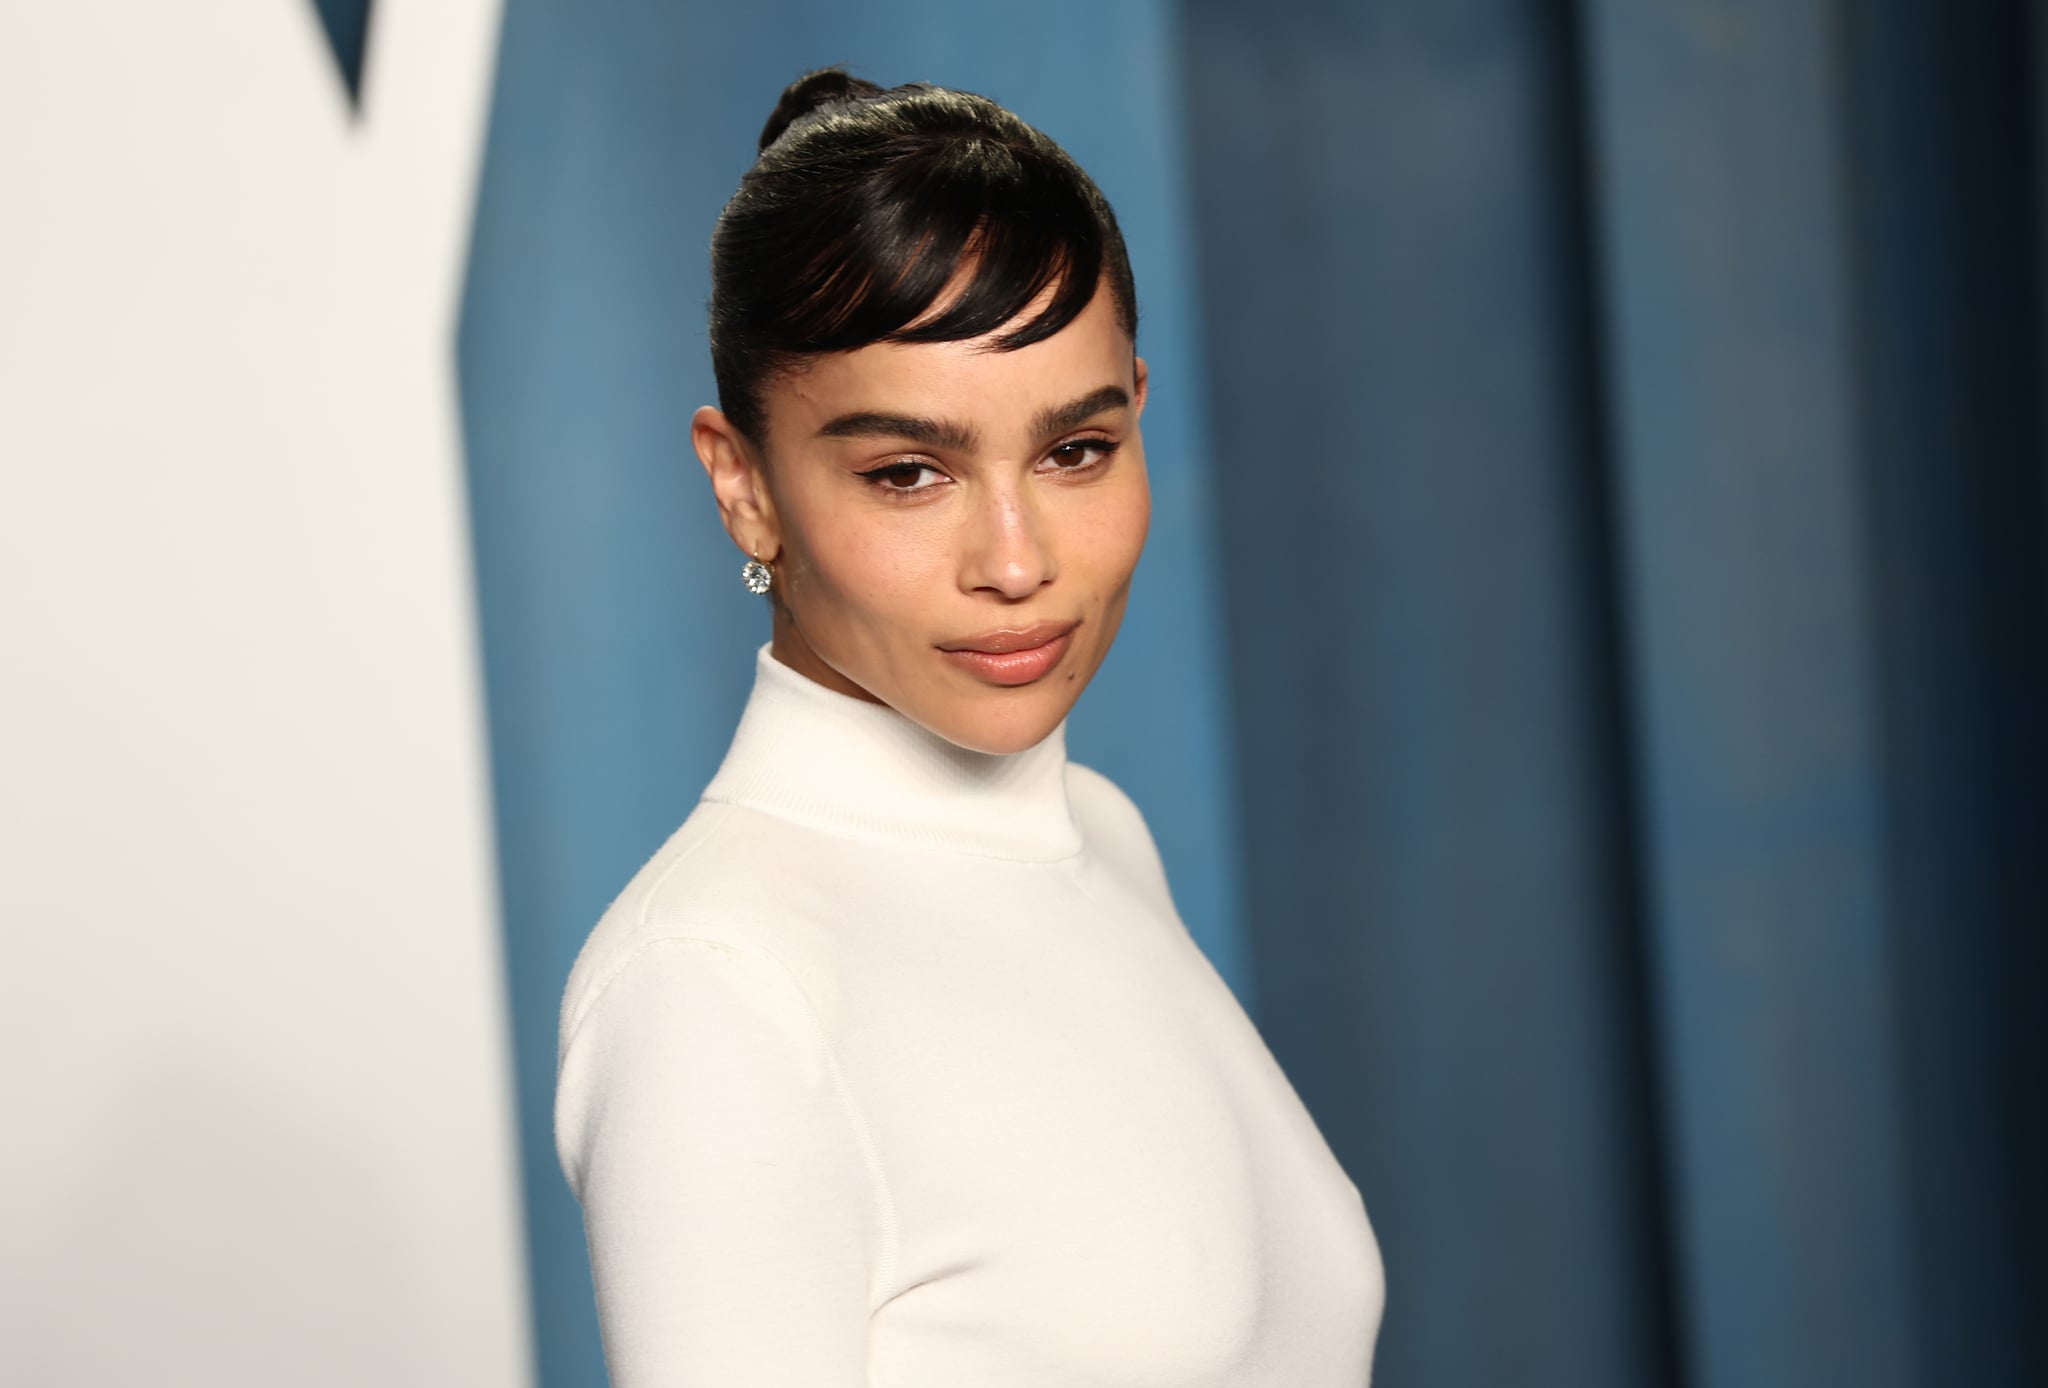 BEVERLY HILLS, CALIFORNIA - MARCH 27: Zoë Kravitz attends the 2022 Vanity Fair Oscar Party hosted by Radhika Jones at Wallis Annenberg Center for the Performing Arts on March 27, 2022 in Beverly Hills, California. (Photo by Arturo Holmes/FilmMagic)